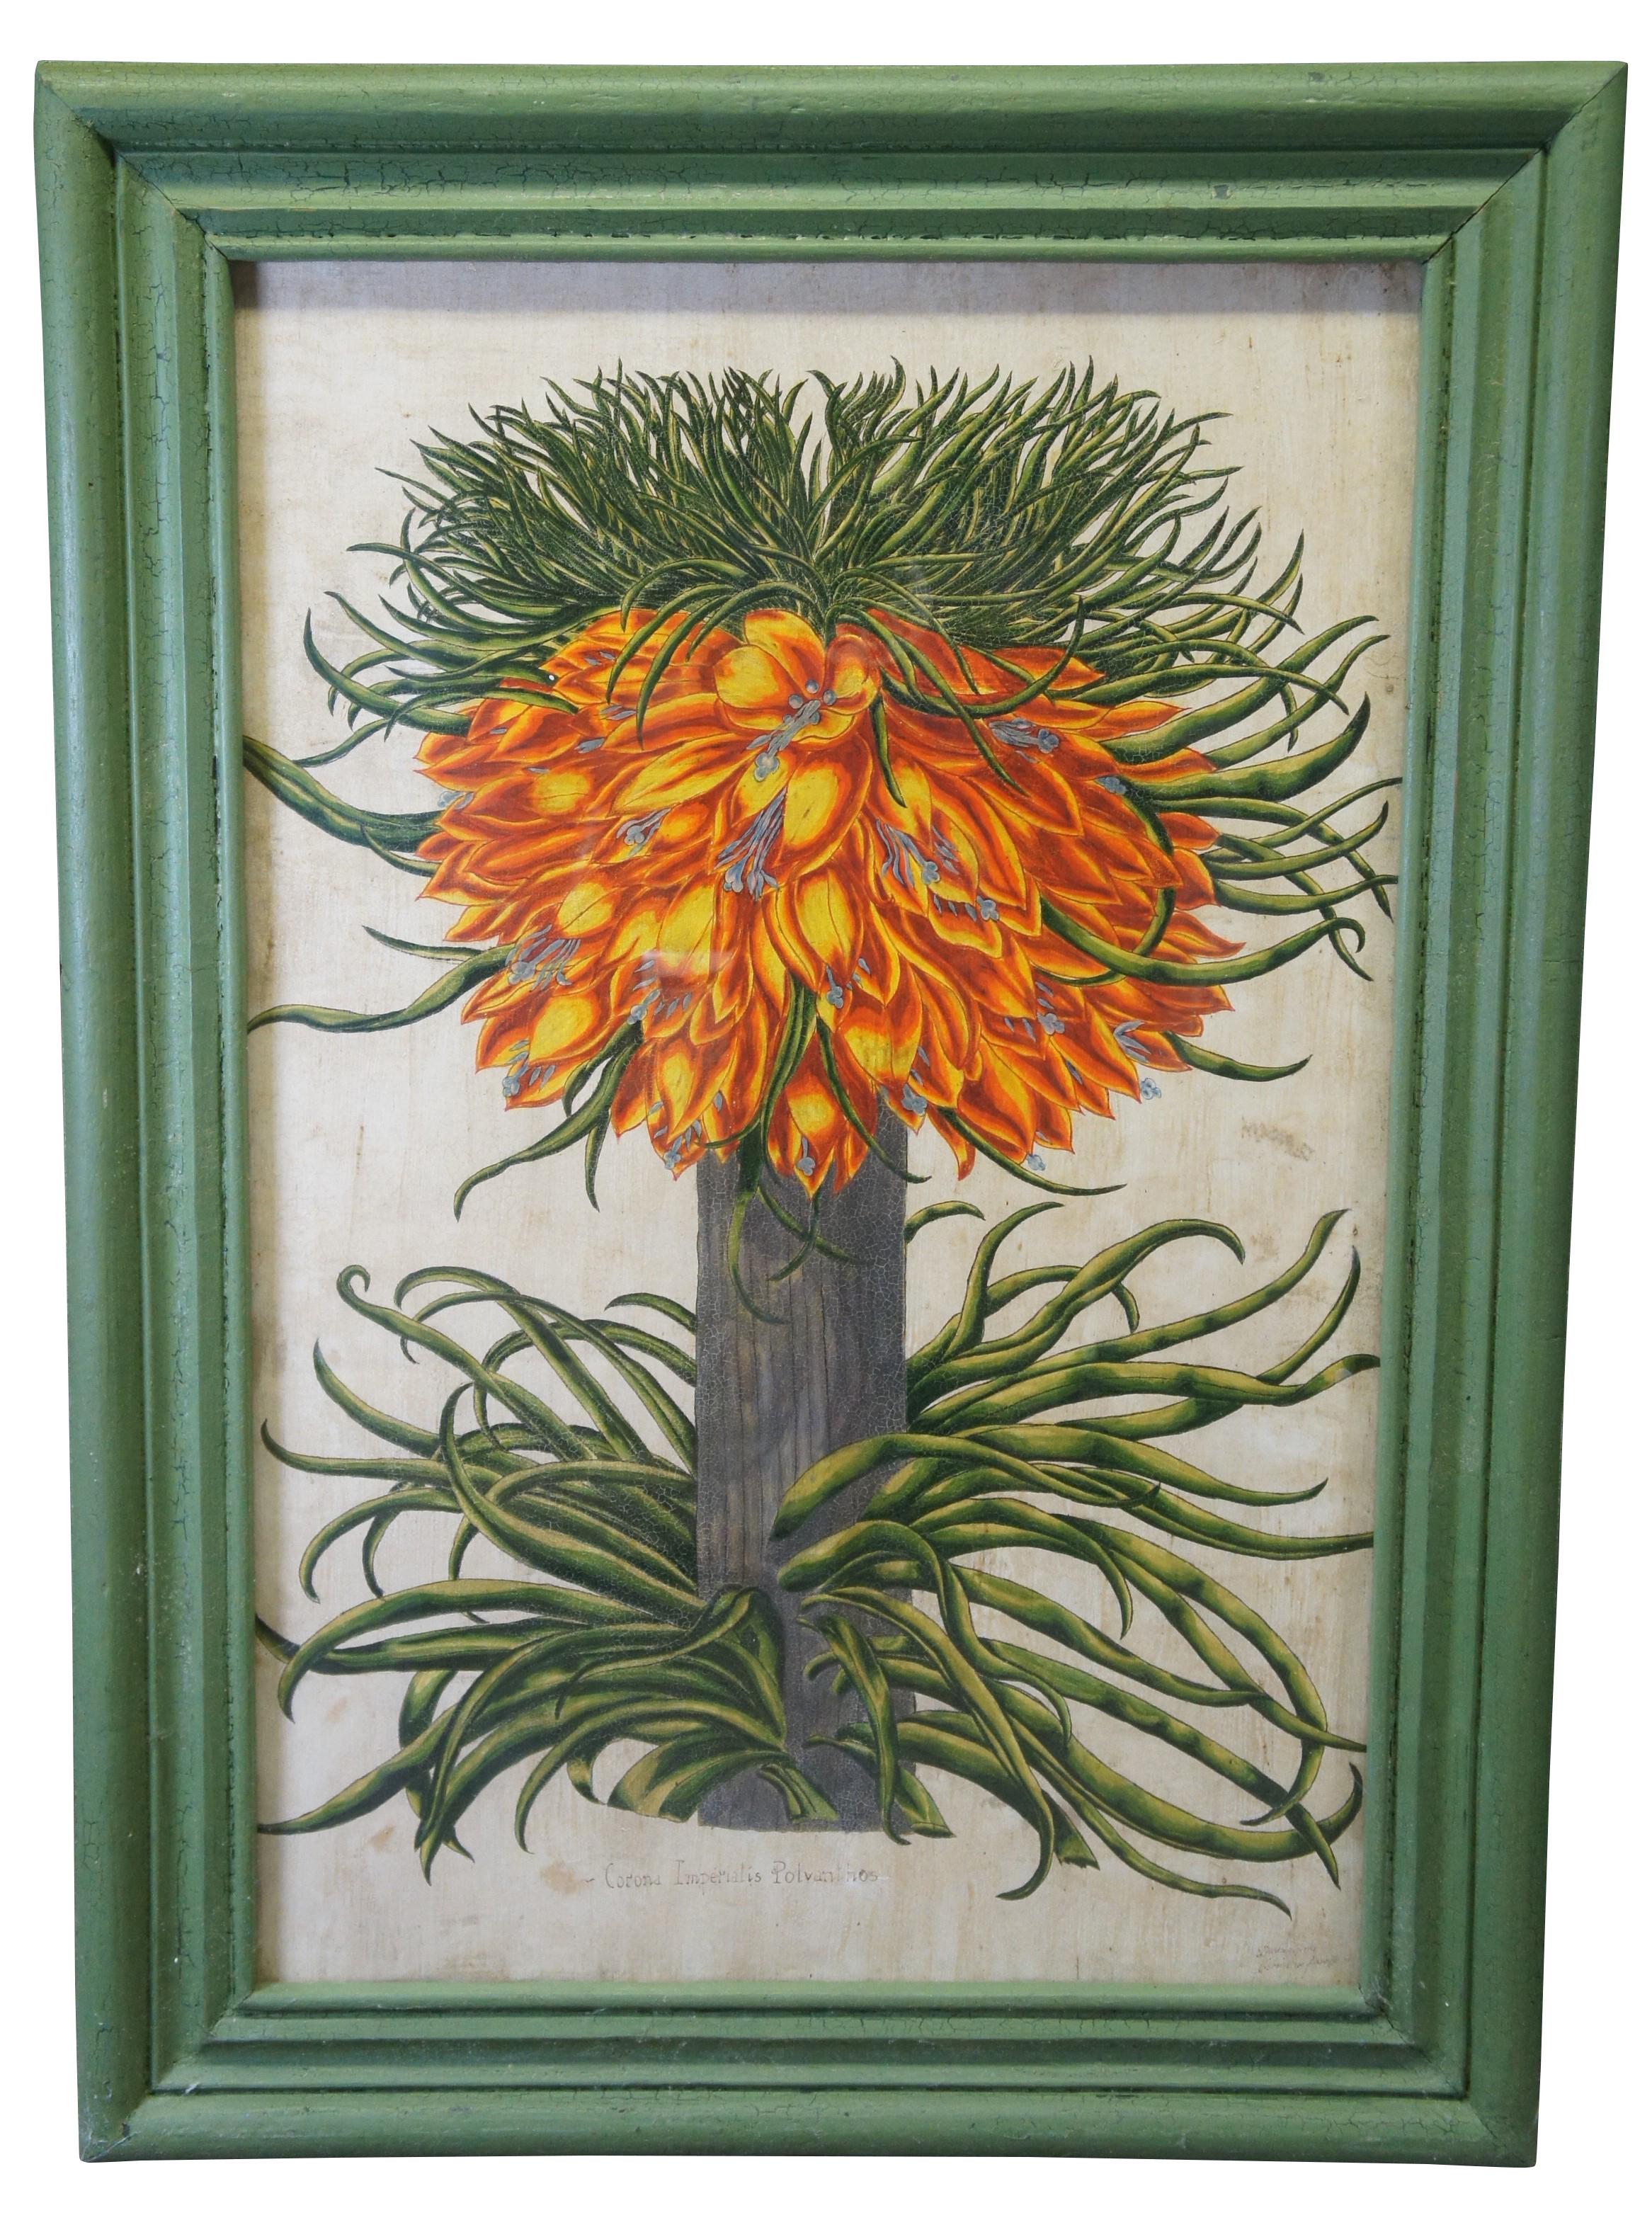 2 Hand Painted Old World Floral Botanical Paintings After Basilius Besler 57